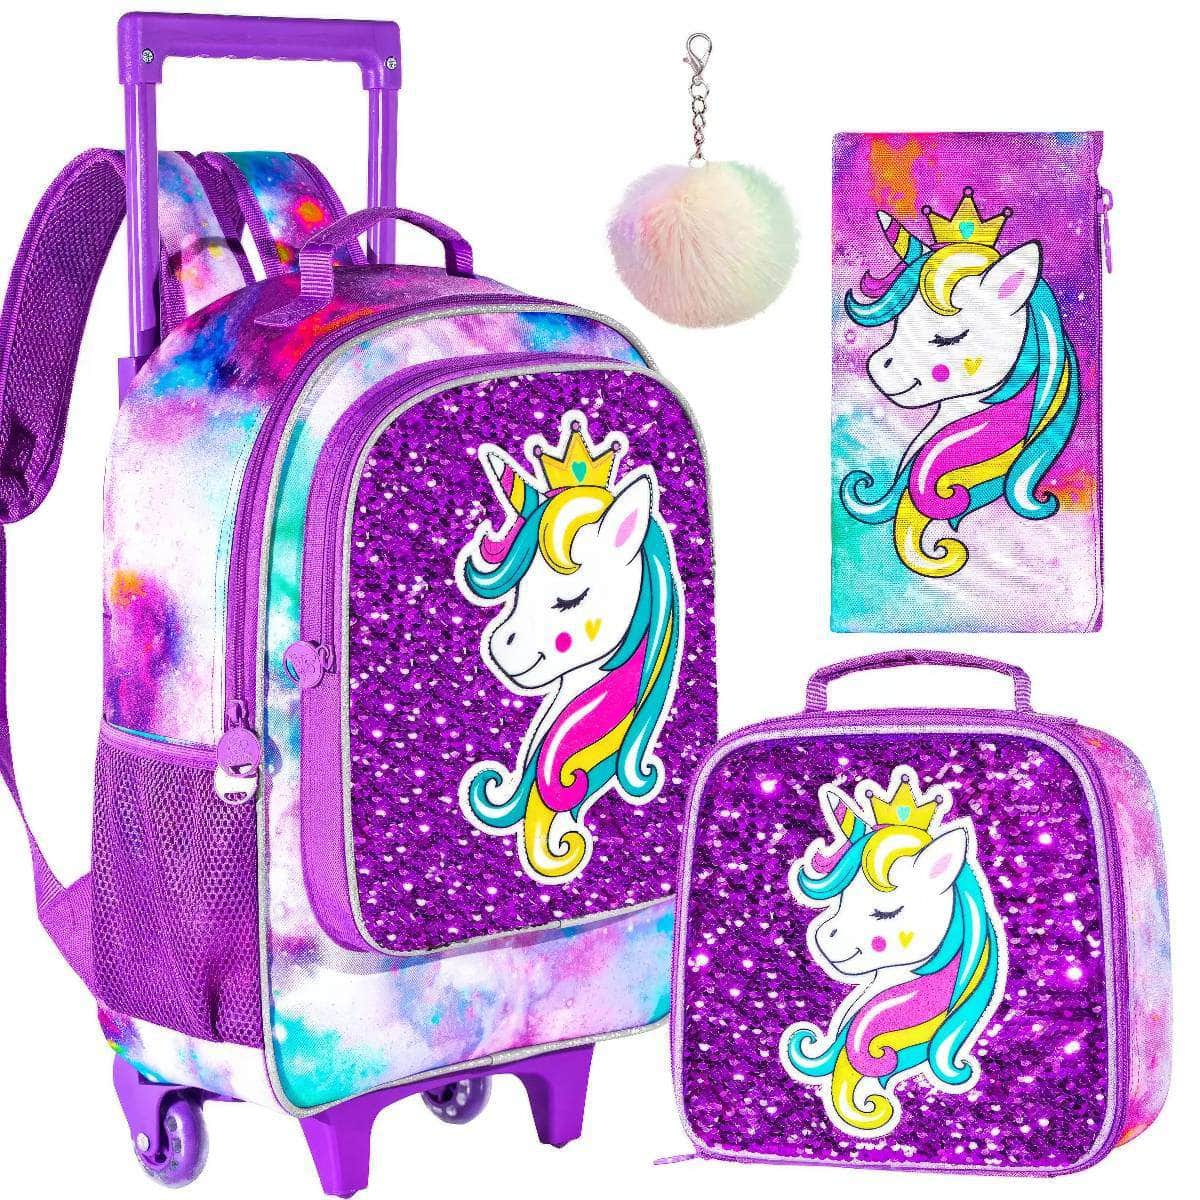 Girls' 3PCS Rolling Backpack Set - Sleeping Unicorn Design with Glow-in-the-dark Function, Roller Wheels, and Lunch Bag Purple